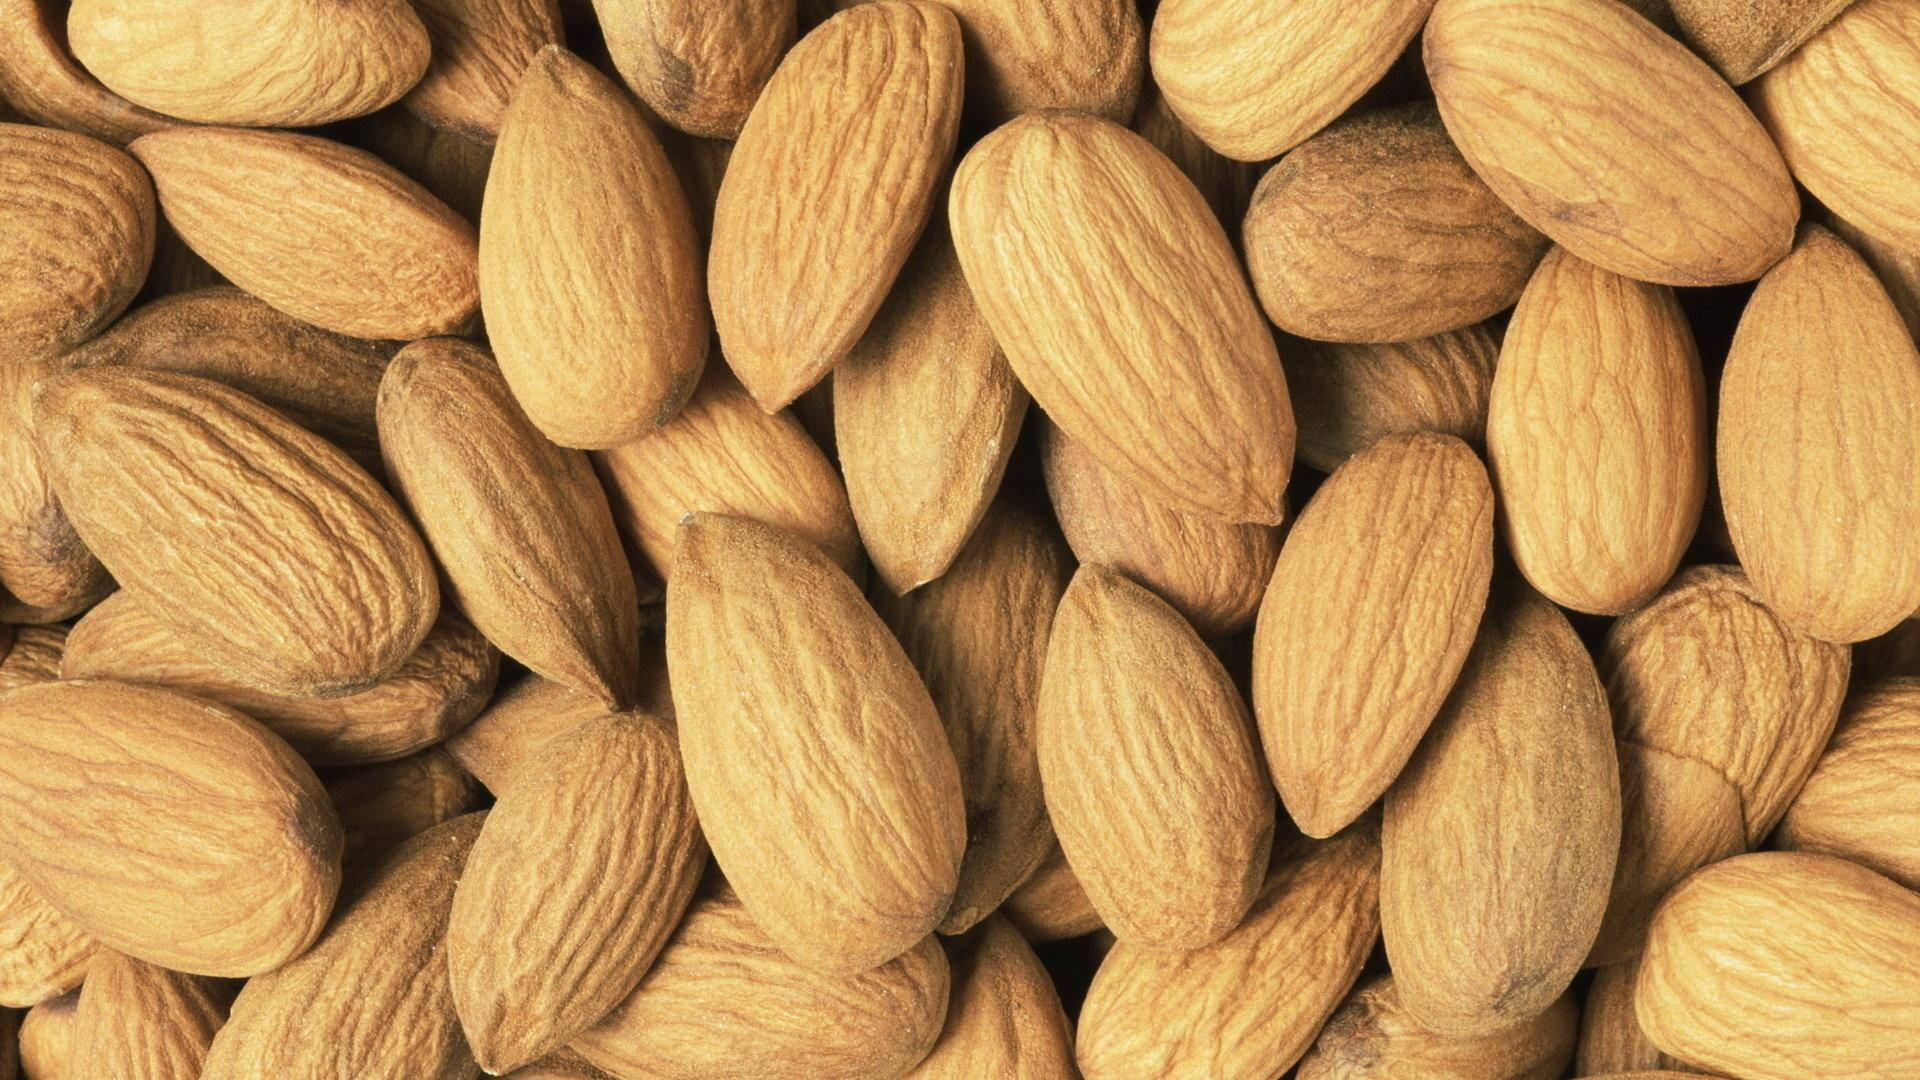 Dry Almond Nuts